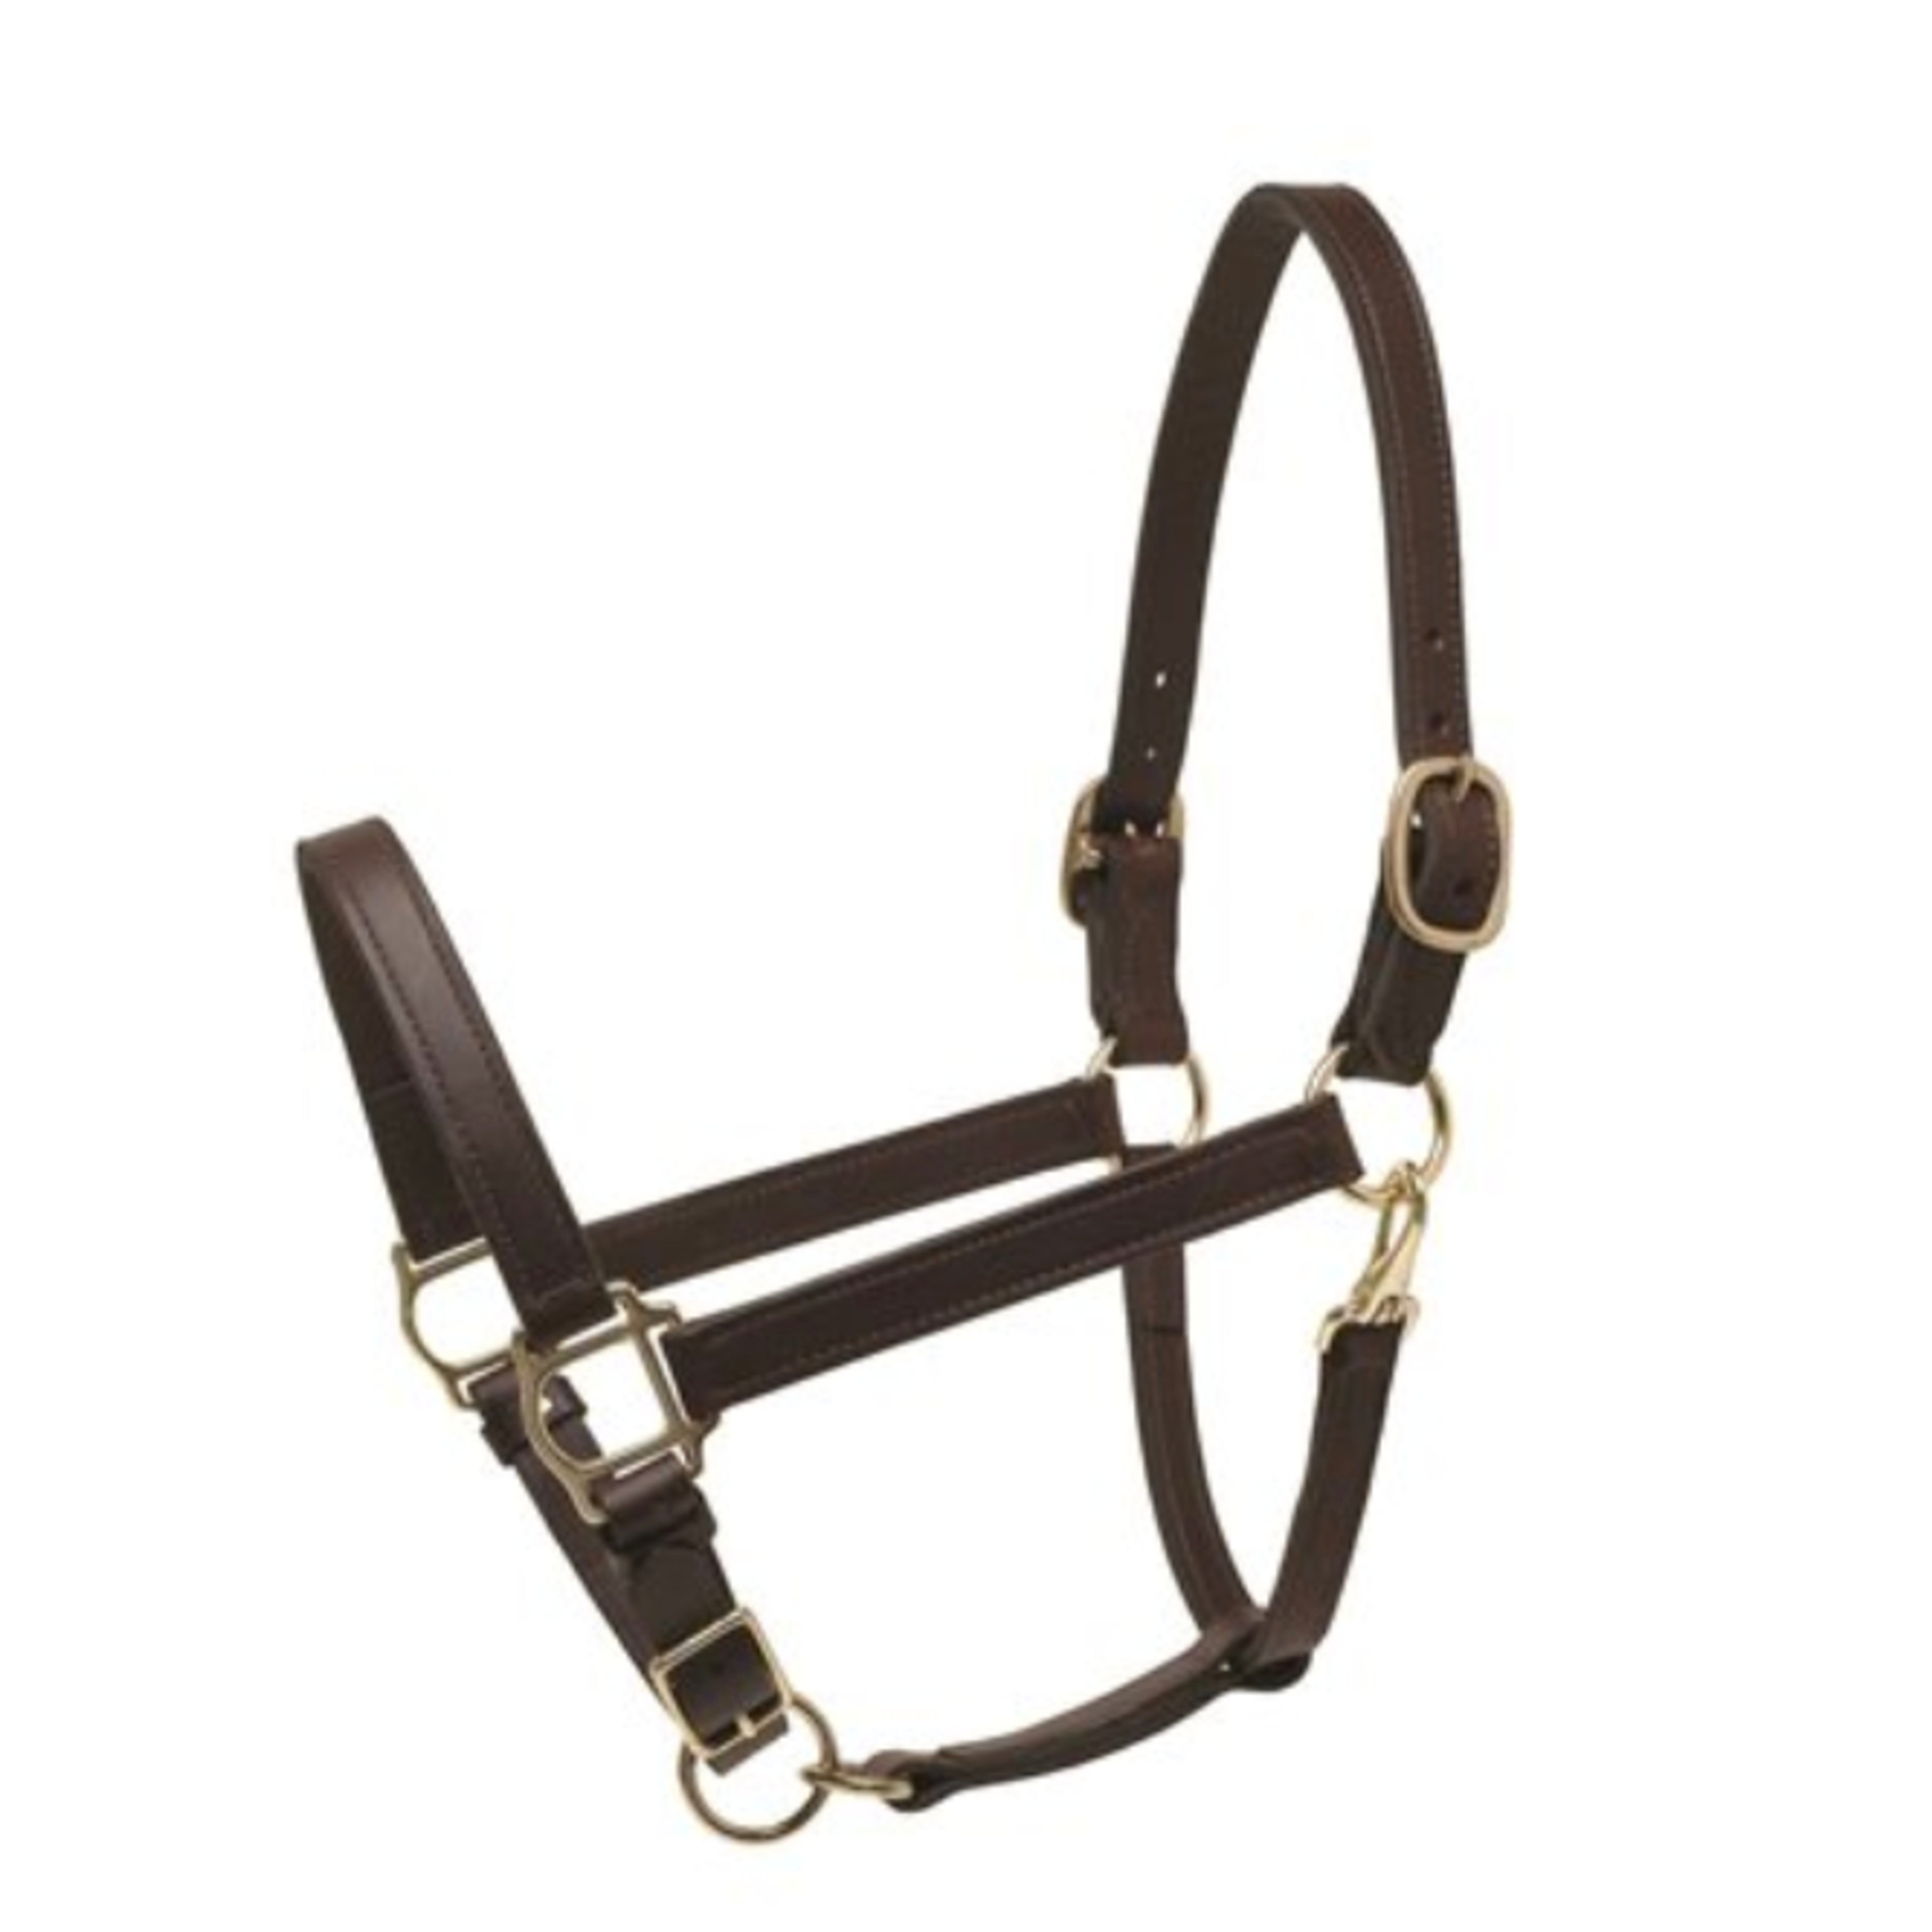 Perris Leather Turnout Halter 1"